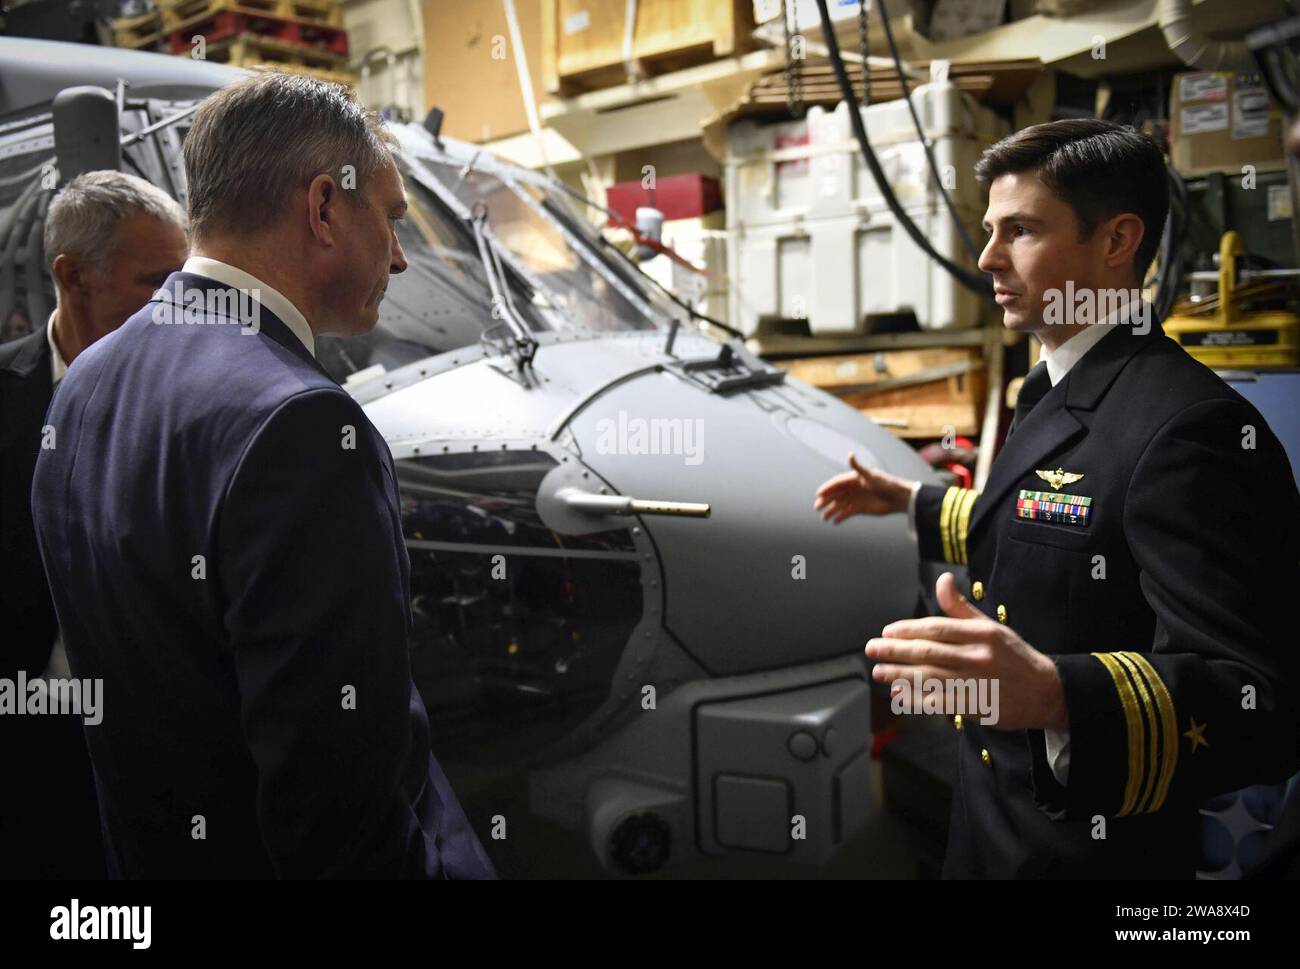 US military forces. 171030UY653-046  OSLO, Norway (Oct. 30, 2017) Lt. Cmdr. Michael Sullivan,  assigned to the 'Grandmasters' of Helicopter Maritime Strike Squadron (HSM) 46, gives a tour of an MH-60R Sea Hawk helicopter to Norwegian Defense Minister Frank Bakke-Jensen  aboard the Arleigh Burke-class guided-missile destroyer USS Oscar Austin (DDG 79) Oct. 30, 2017. Oscar Austin is on a routine deployment supporting U.S. national security interests in Europe, and increasing theater security cooperation and forward naval presence in the U.S. 6th Fleet area of operations. (U.S. Navy photo by Mass Stock Photo